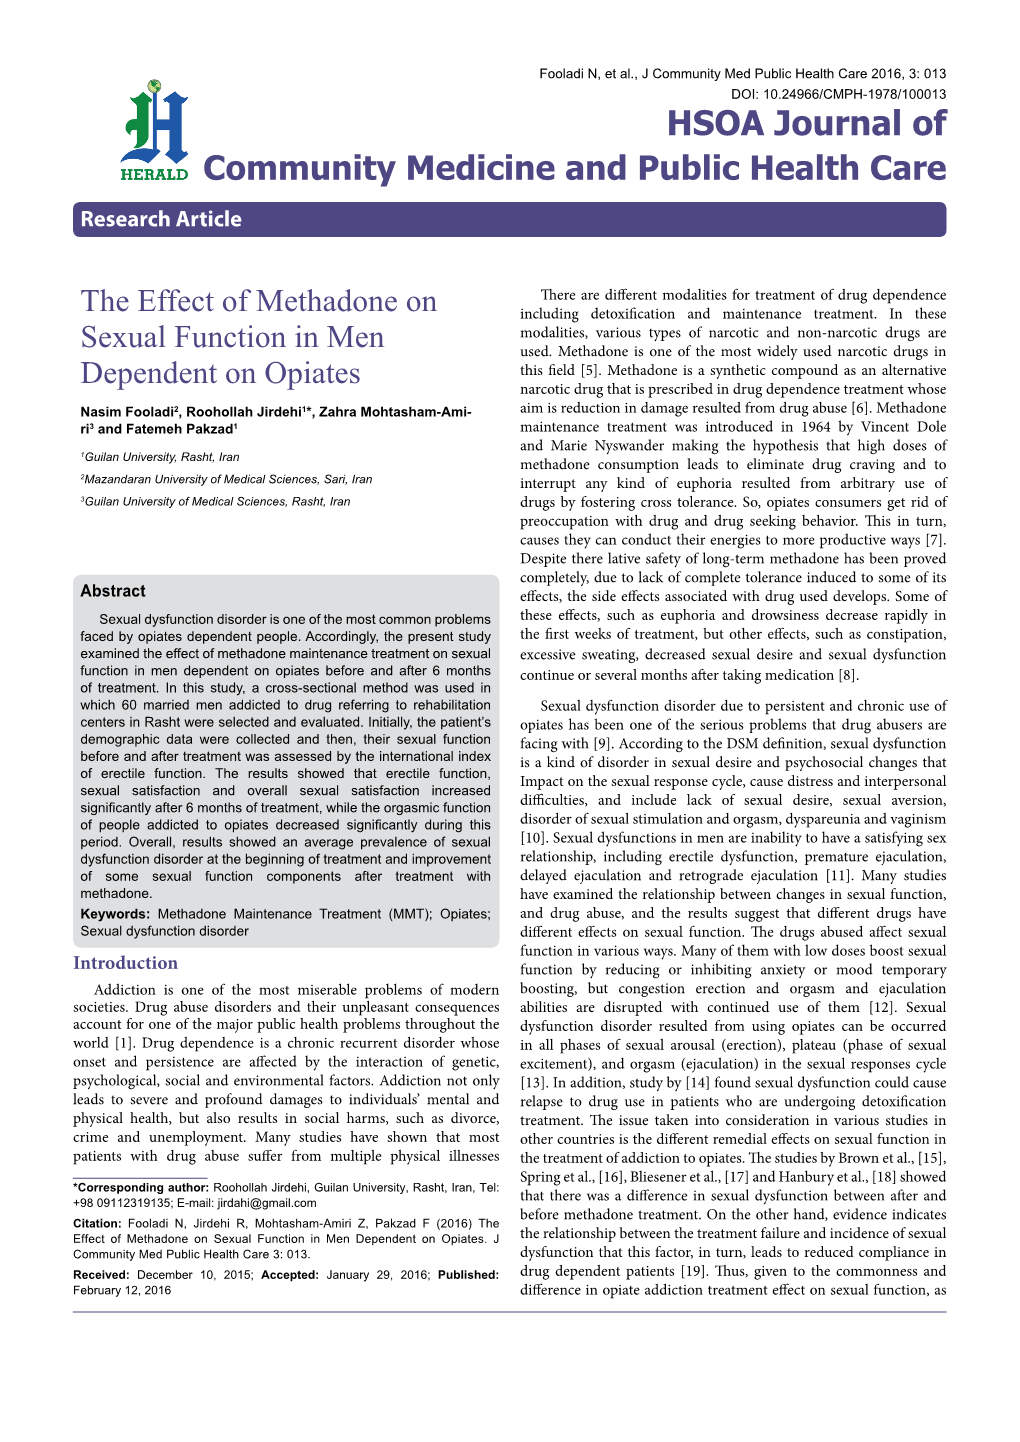 The Effect of Methadone on Sexual Function in Men Dependent on Opiates